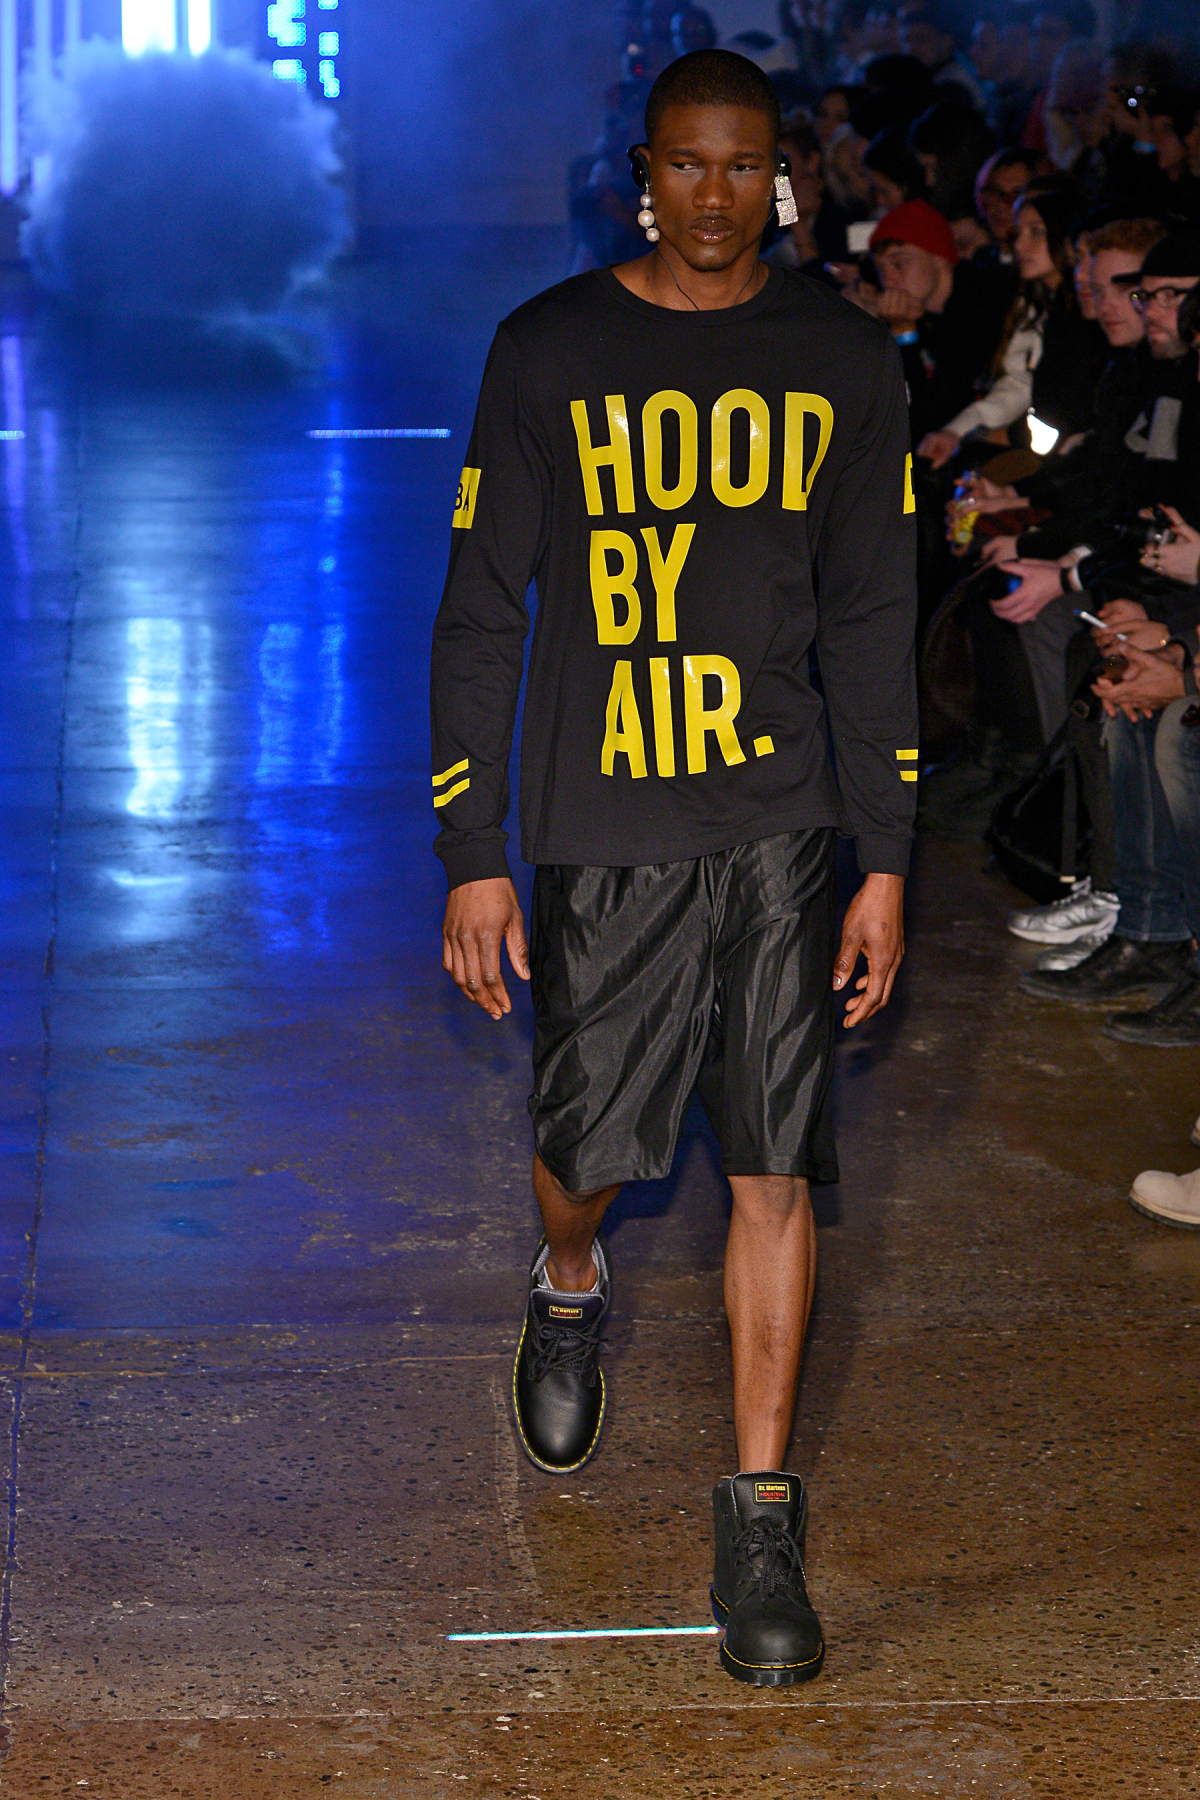  Hood by Air, image courtesy of the artist